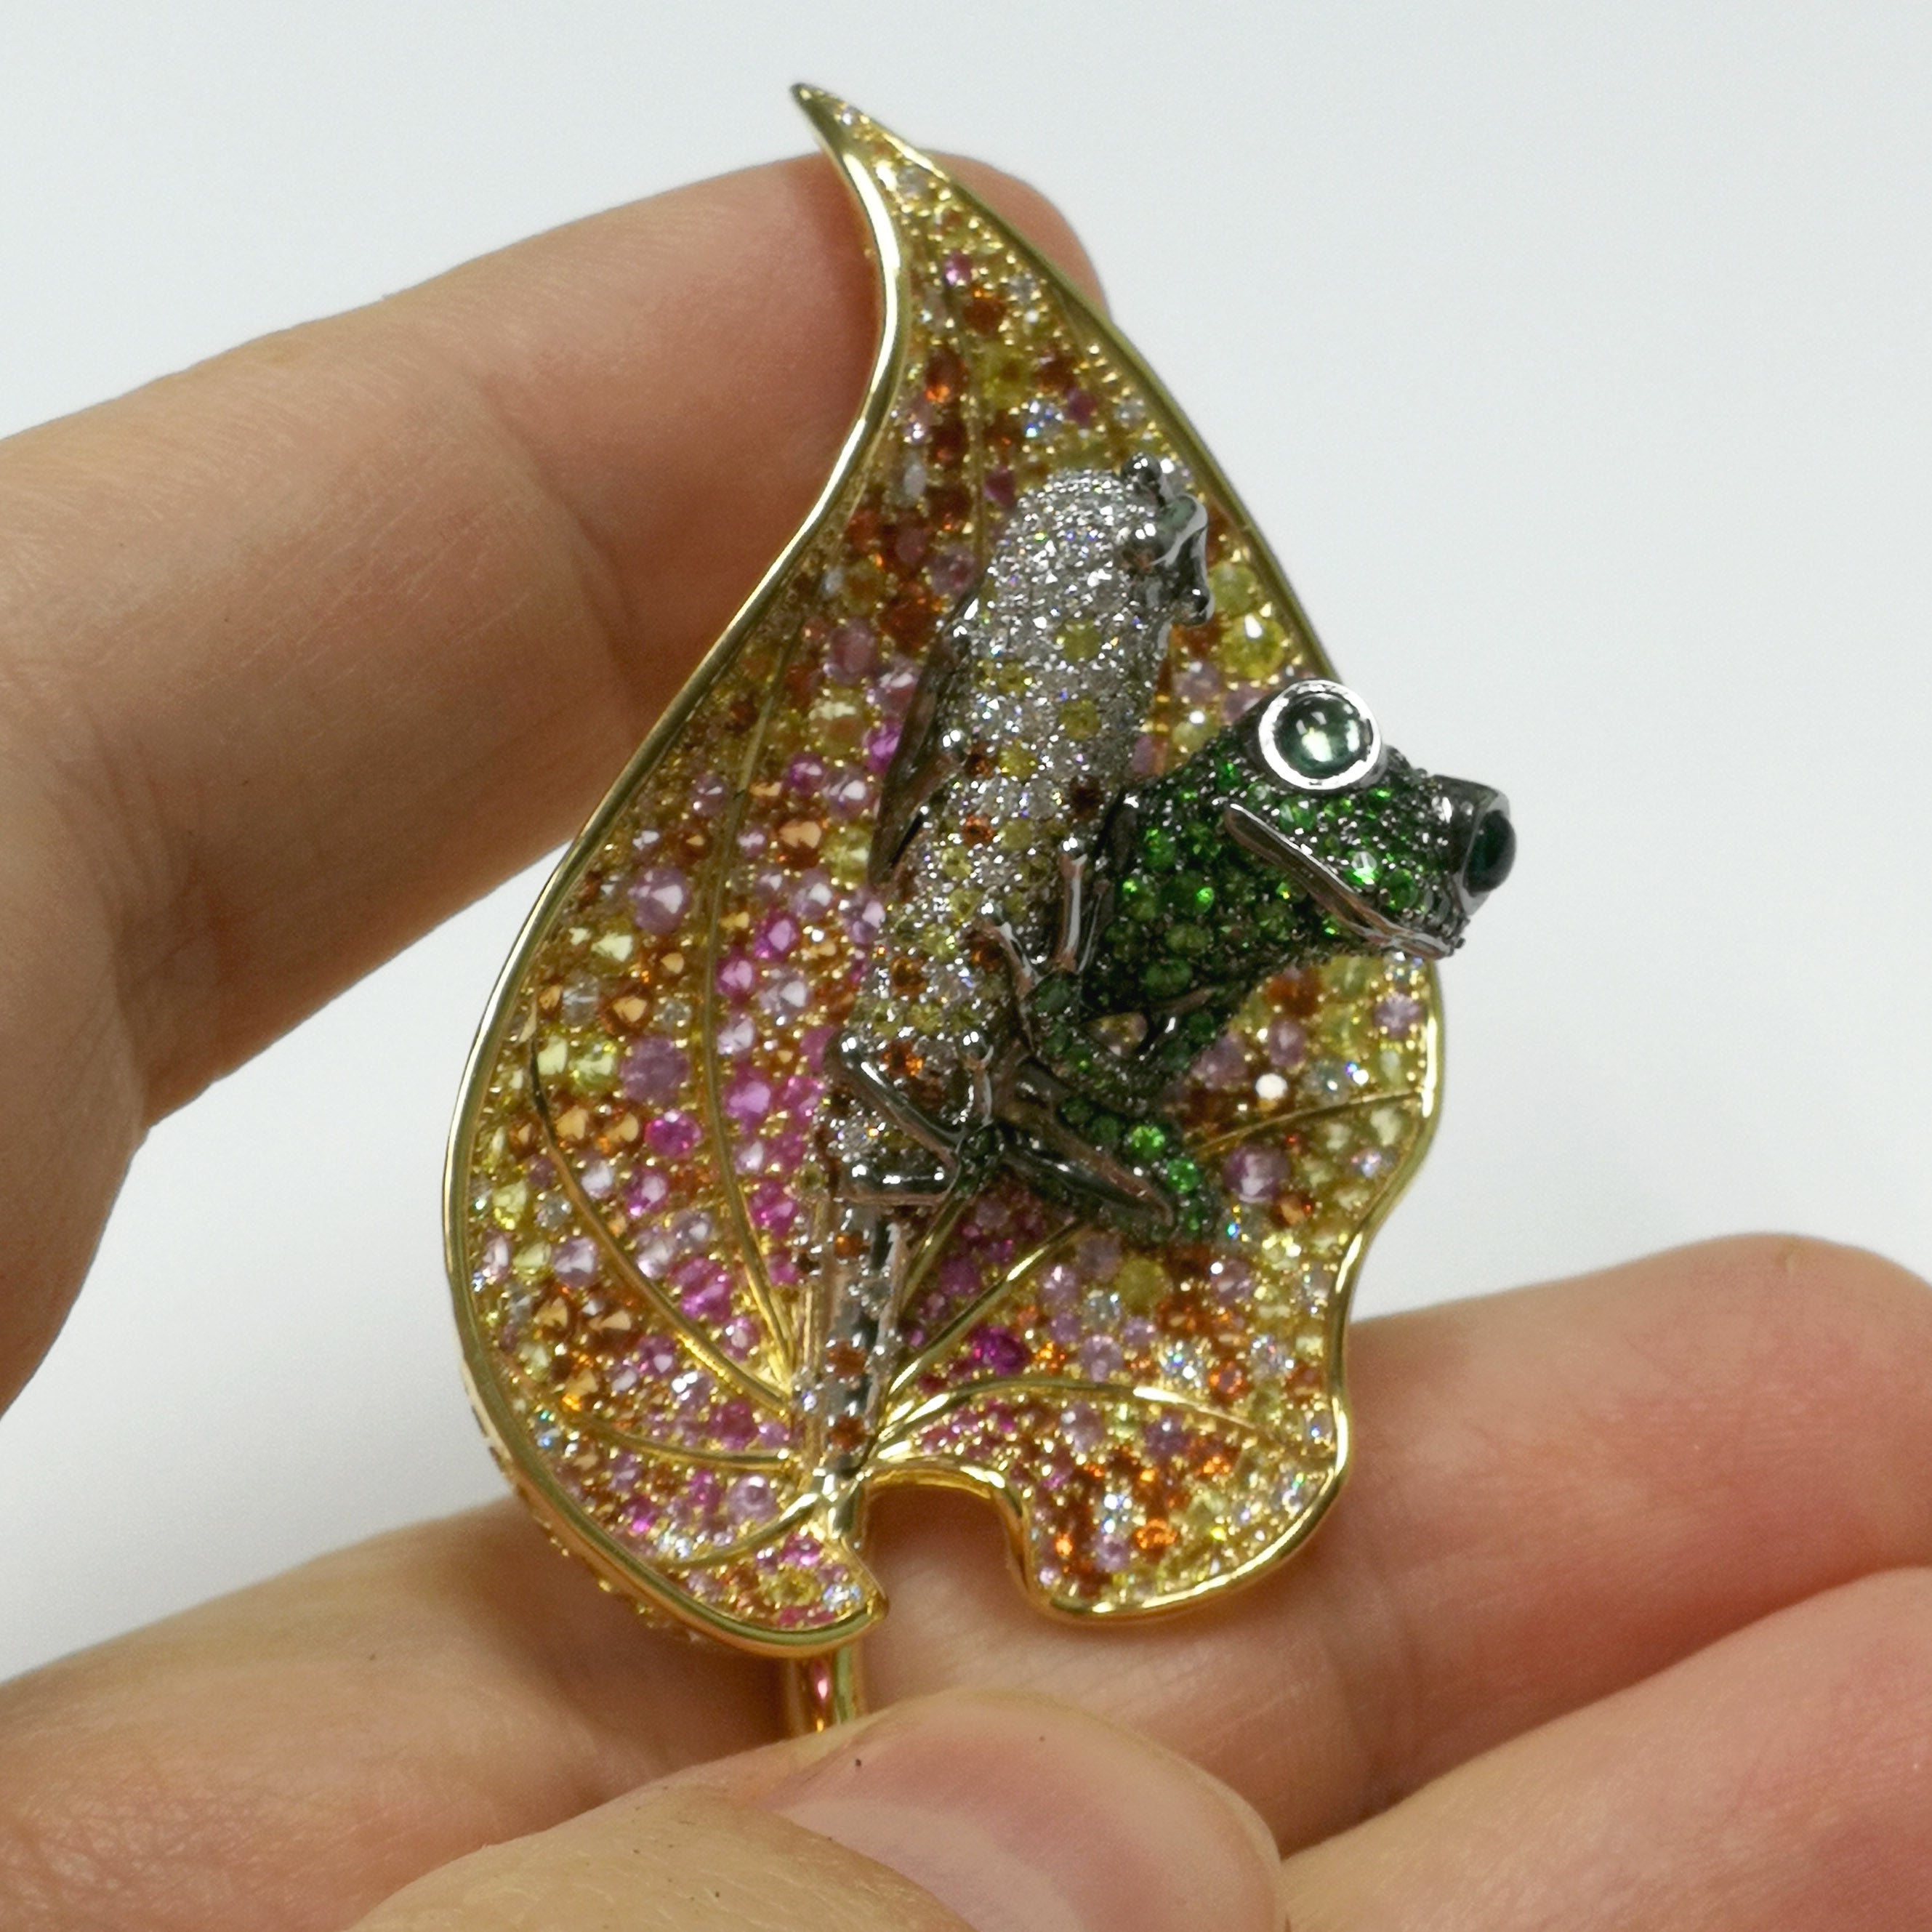 Brs 0179-0, 18K Yellow and White Gold, Multi-Color Sapphires, Diamonds Frog Brooch